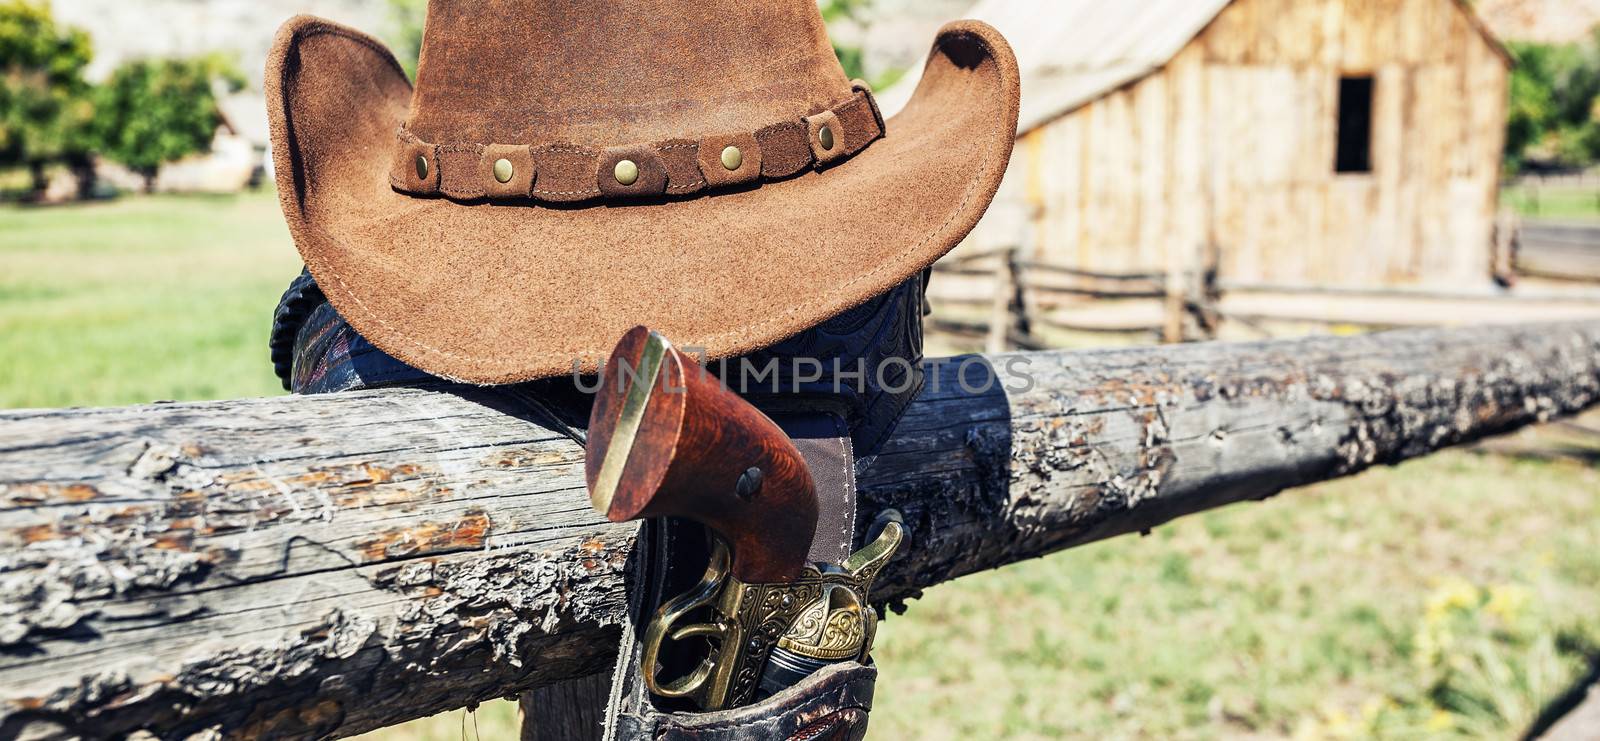 cowboy gun and hat outdoor in a ranch, panoramic view